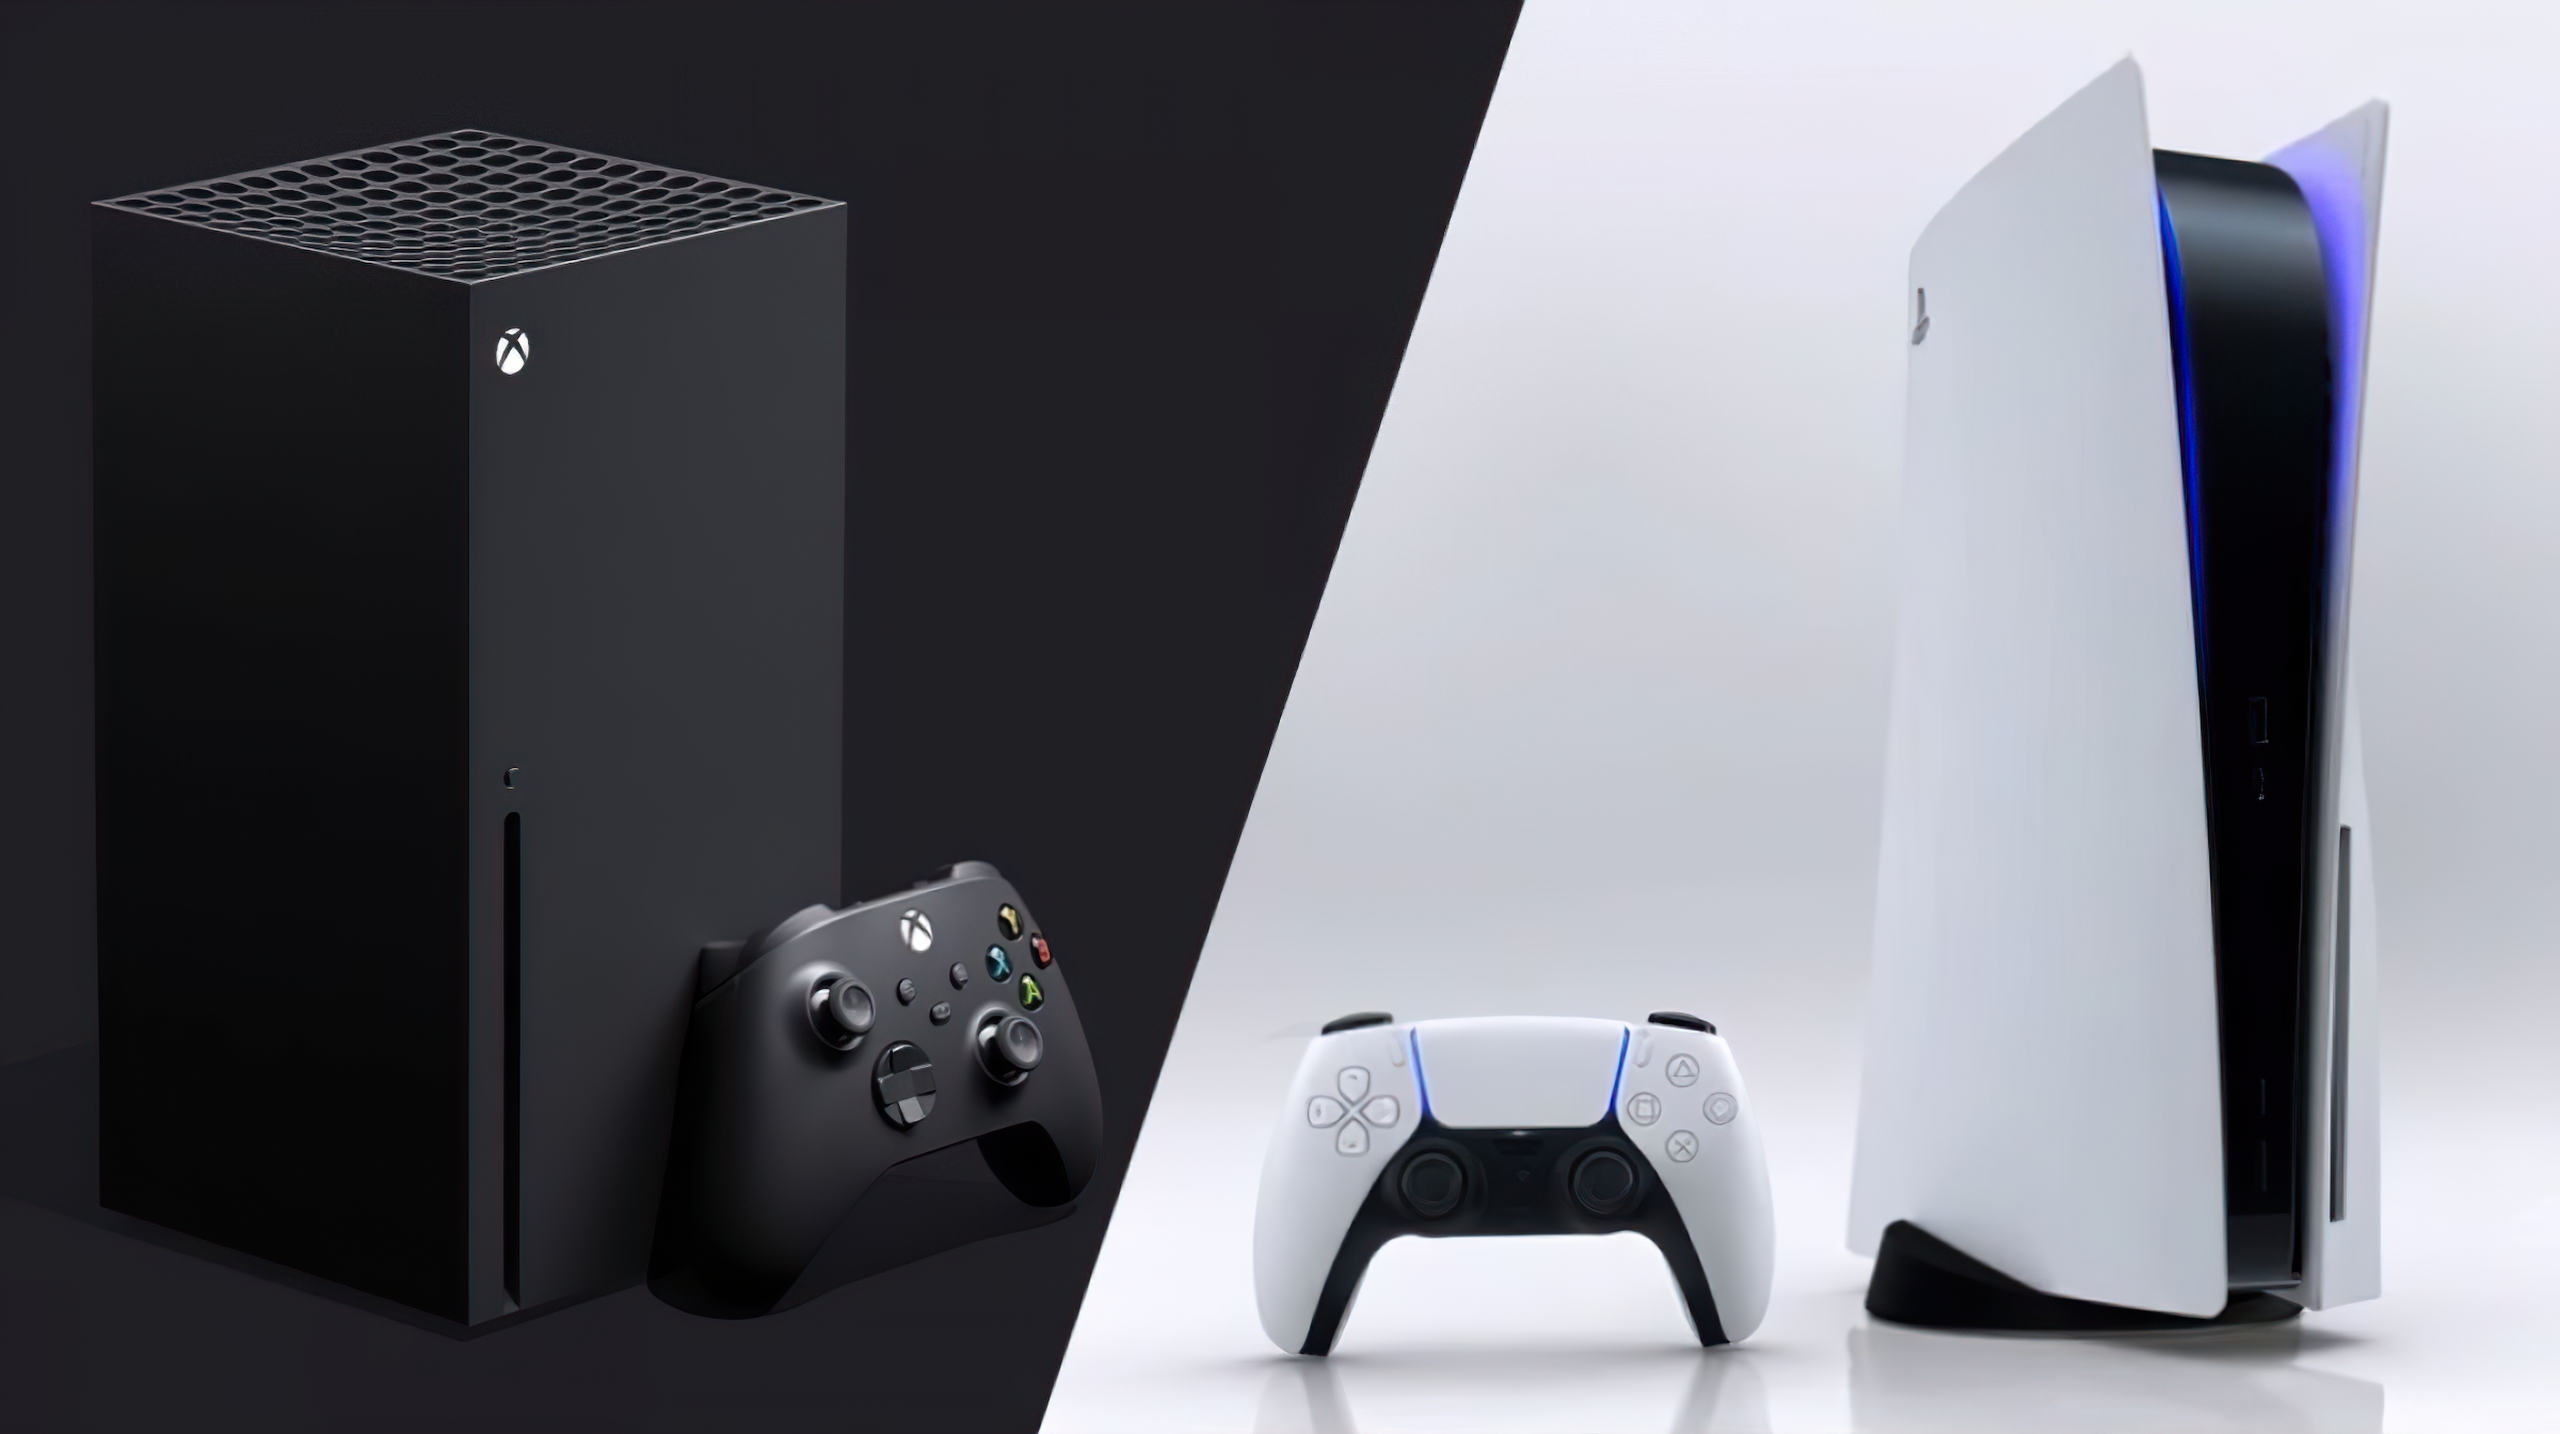 Библиотека ps5. Ps5 Xbox. Ps5 Xbox Series x. Плейстейшен ps5. Sony PLAYSTATION ps5 Console.